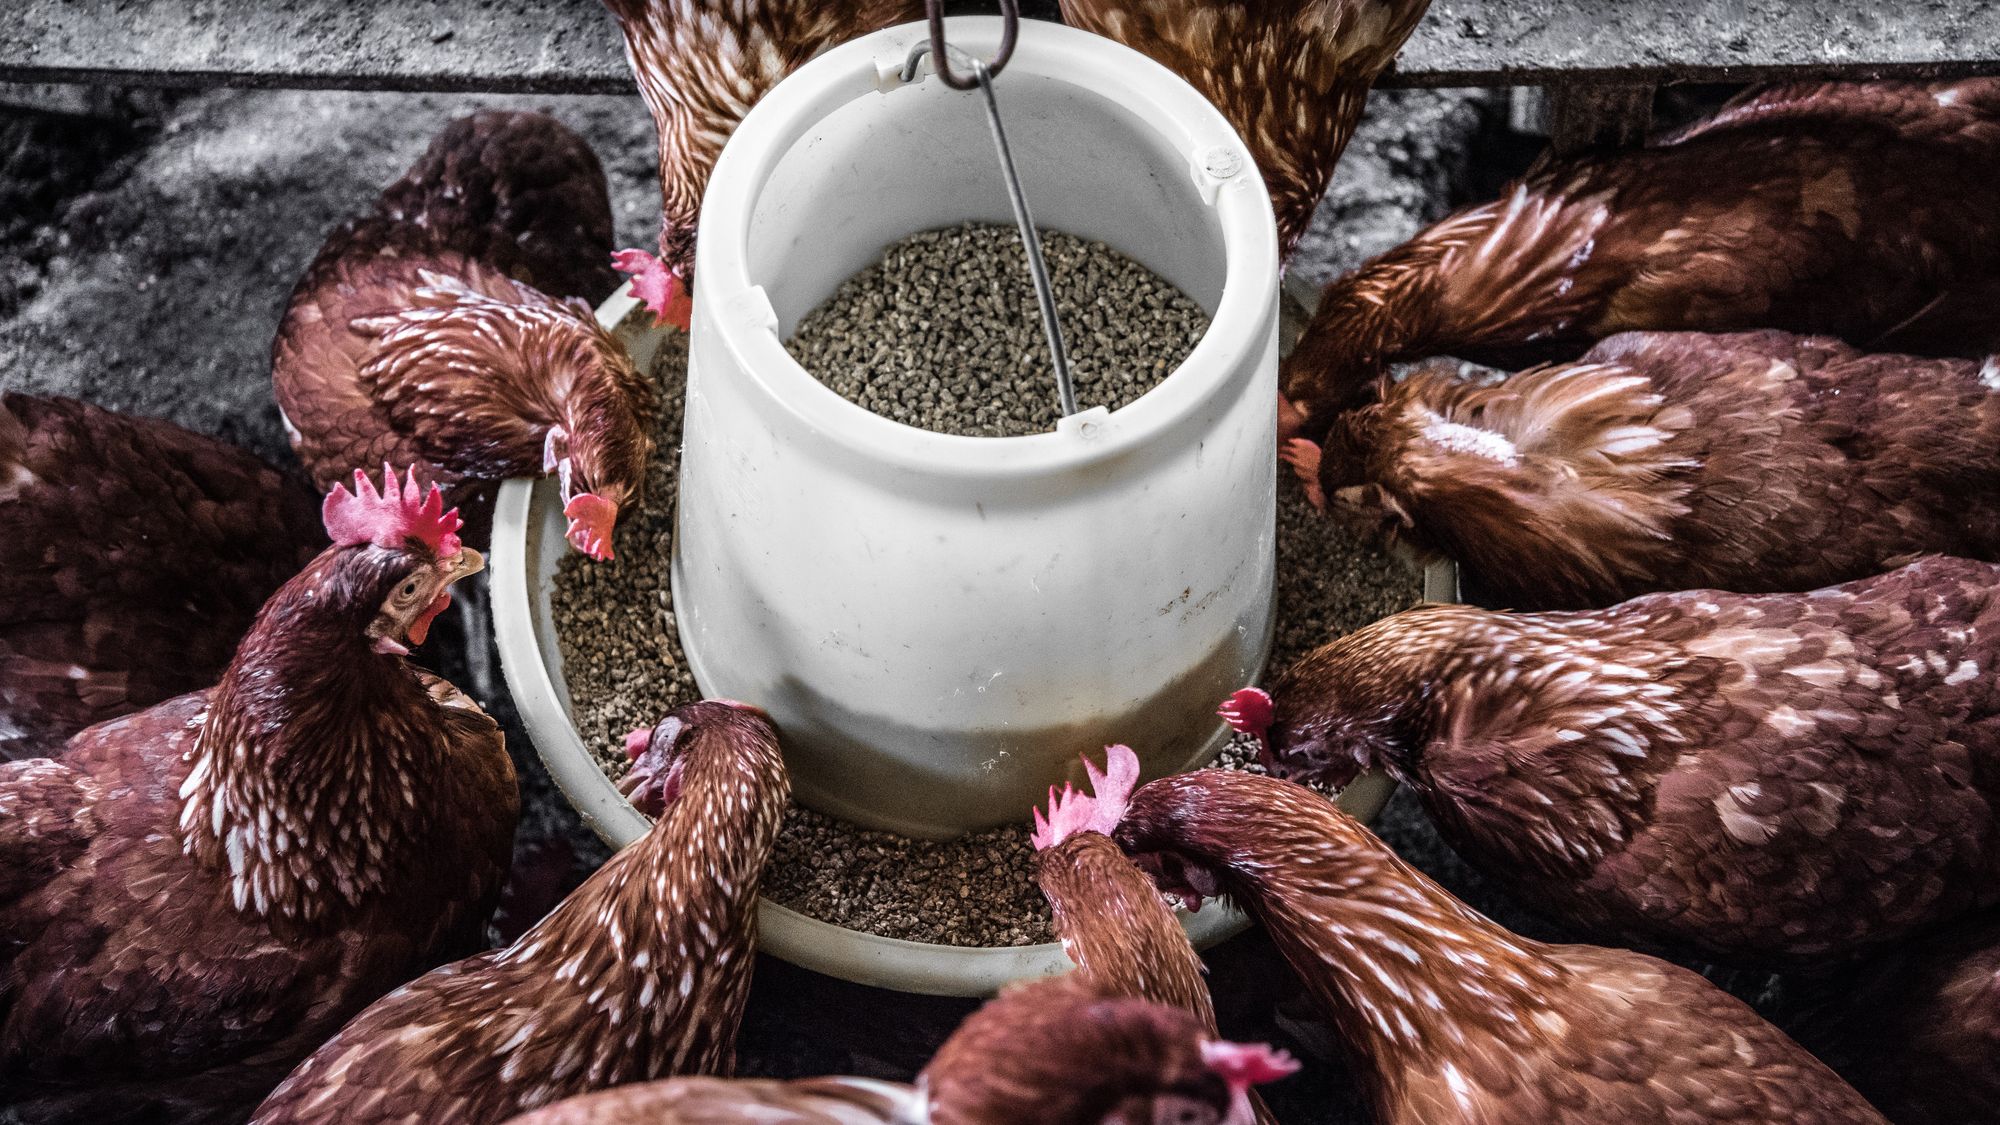 chickens eating at feeder Backyard Chicken Keeping: Tips for Raising Hens in Rooster-Restricted Areas